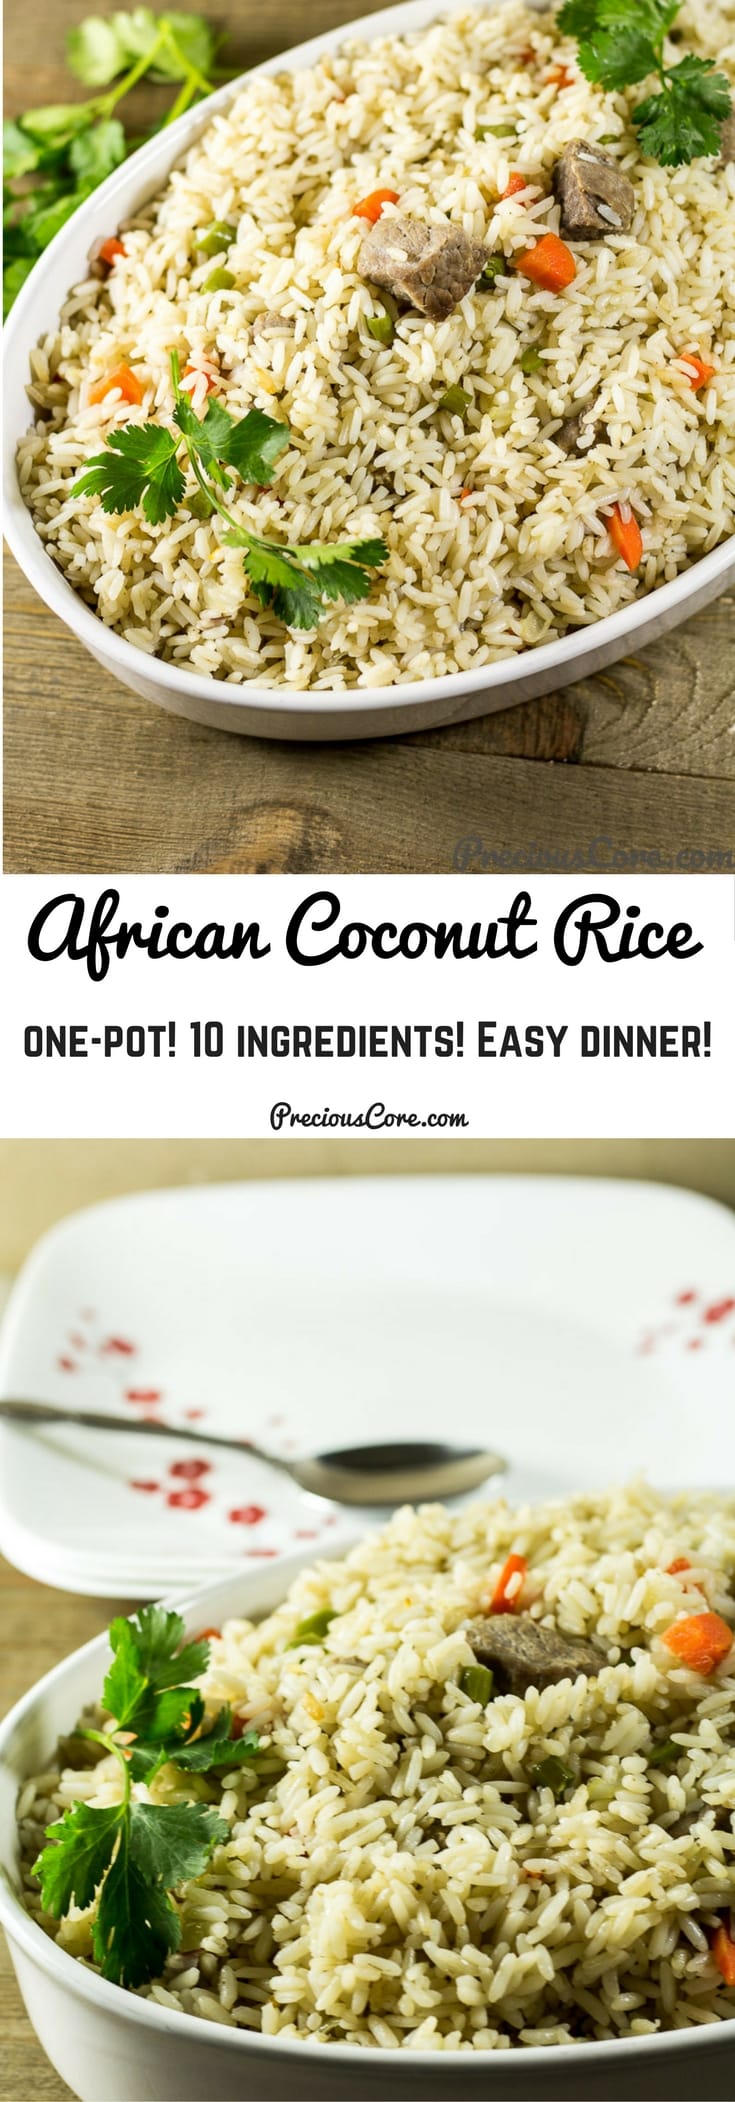 Cameroonian Coconut Rice - African coconut rice recipe. All you need is 10 ingredients and one-pot to make this coconut rice dinner. So good! Get the recipe on Precious Core. #onepot #dinner #easymeals #africanfood #preciouscore